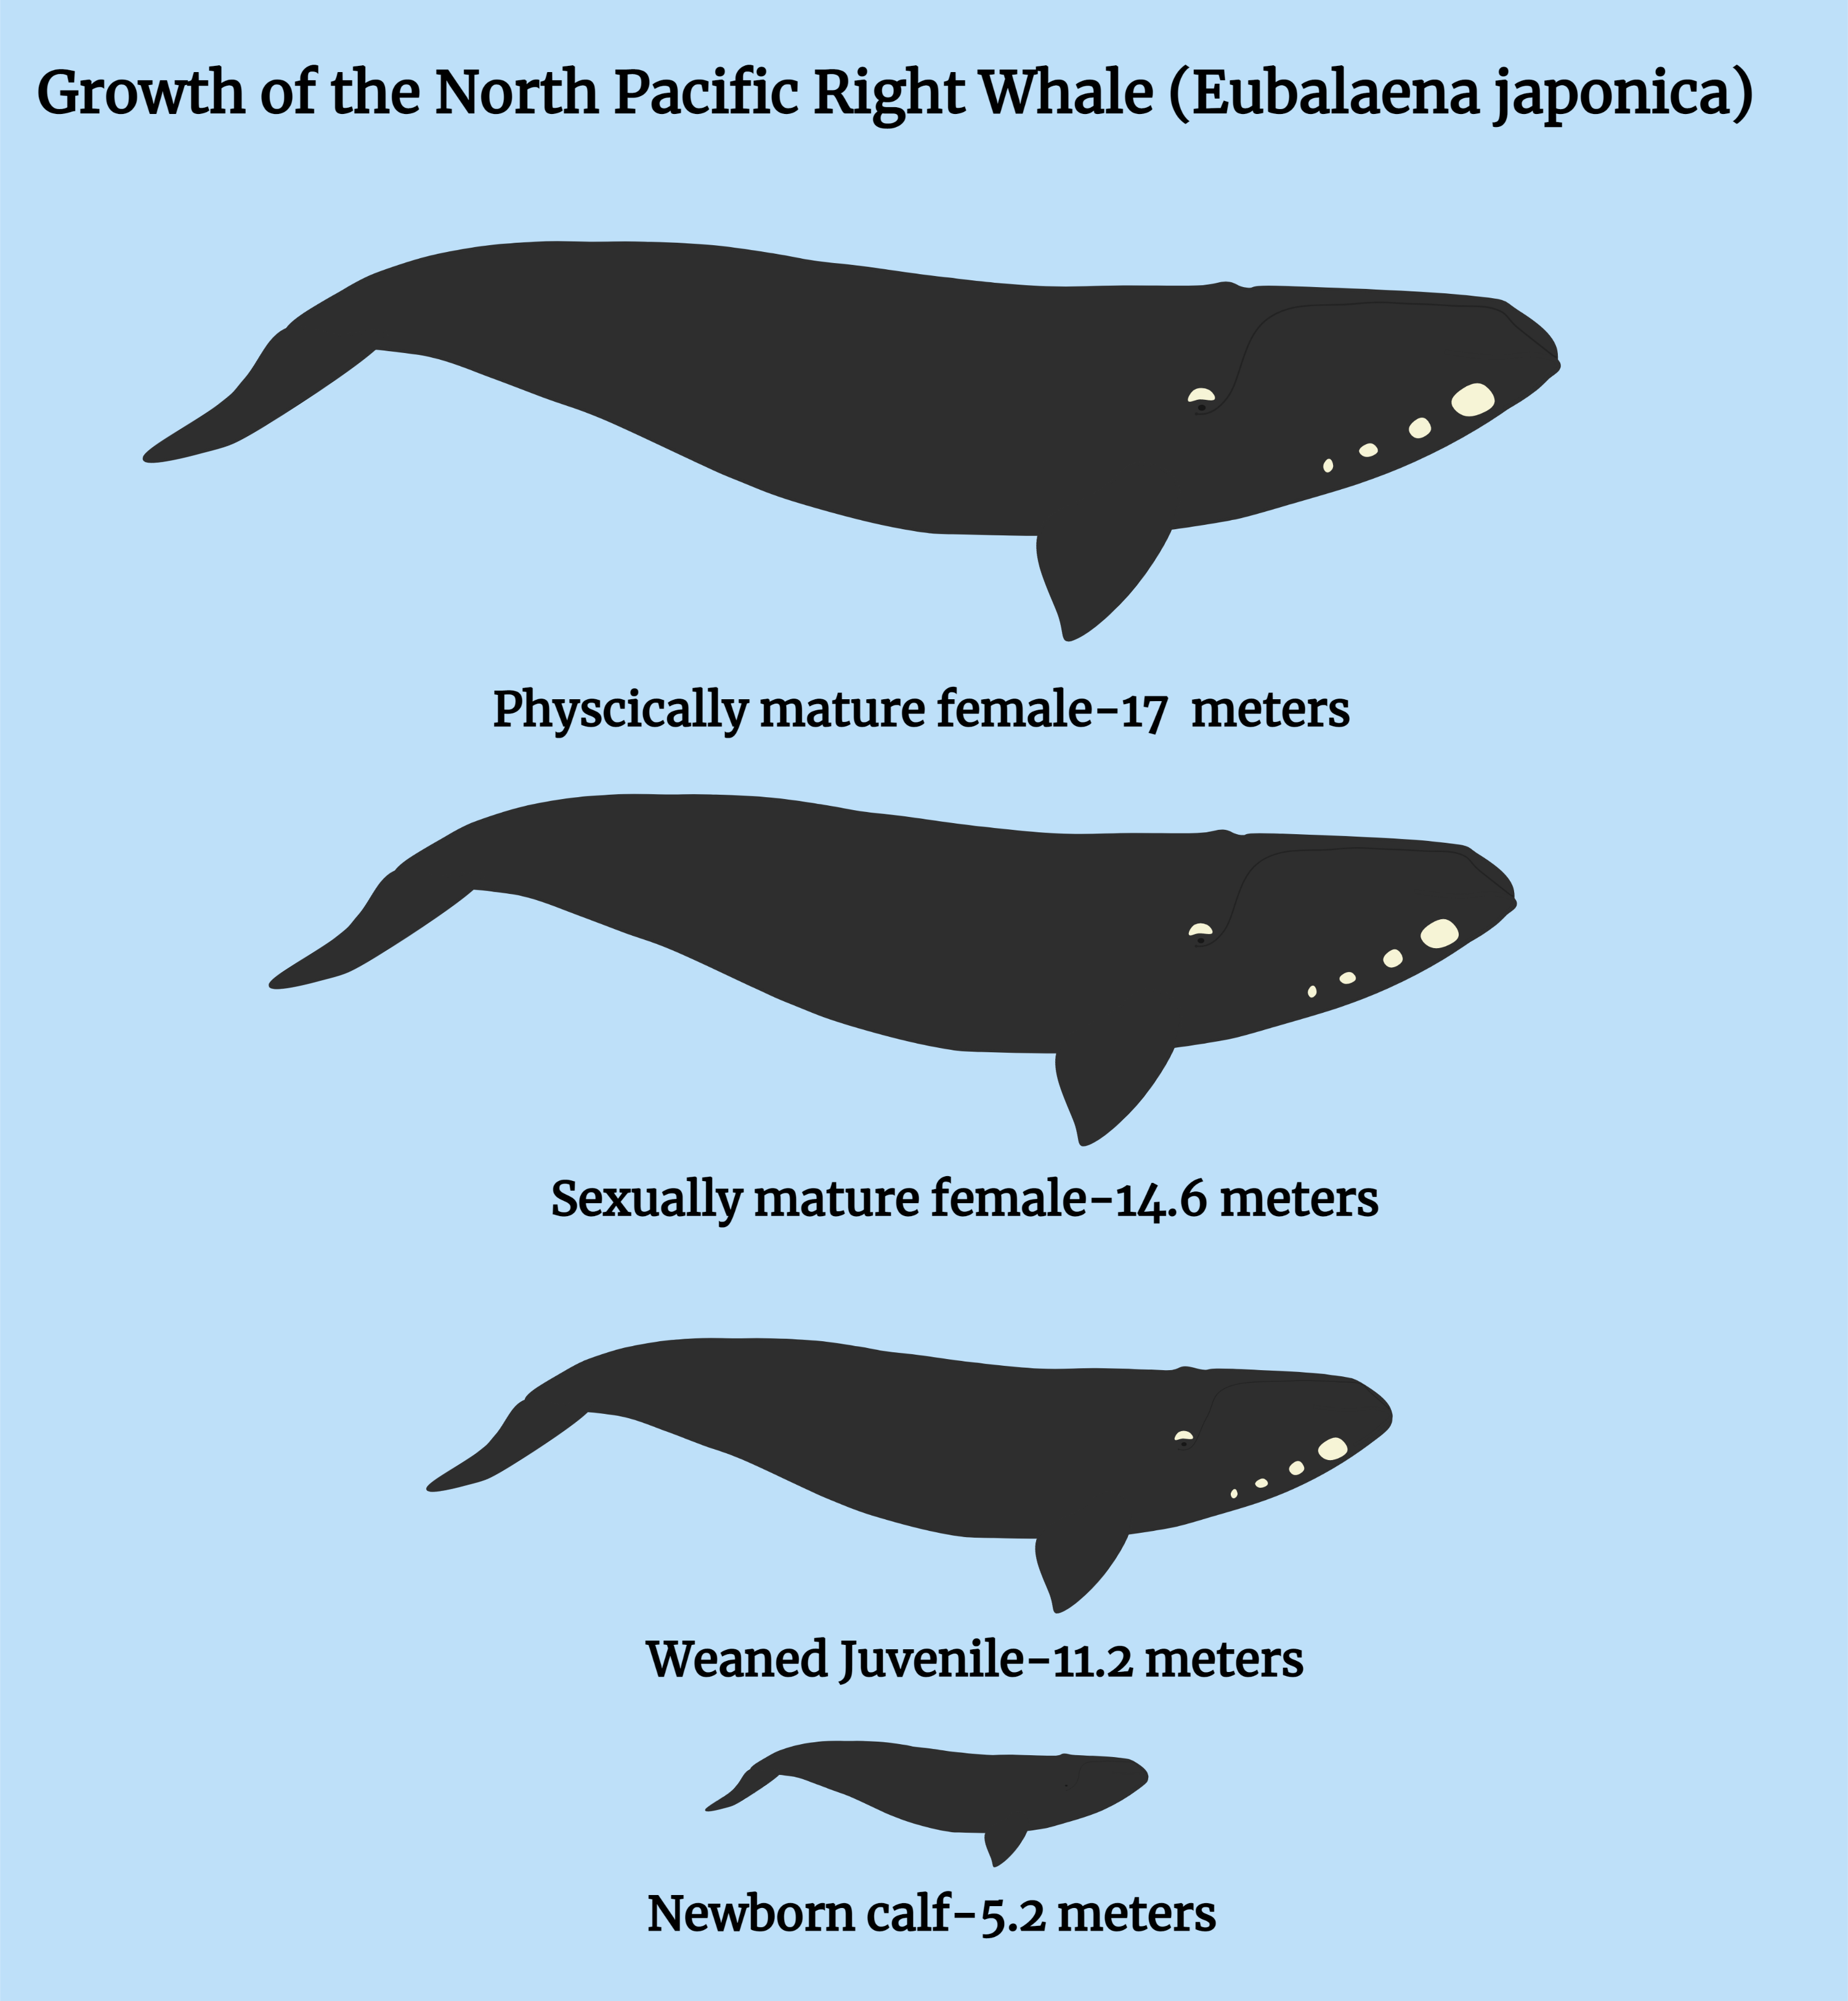 Right whale life history